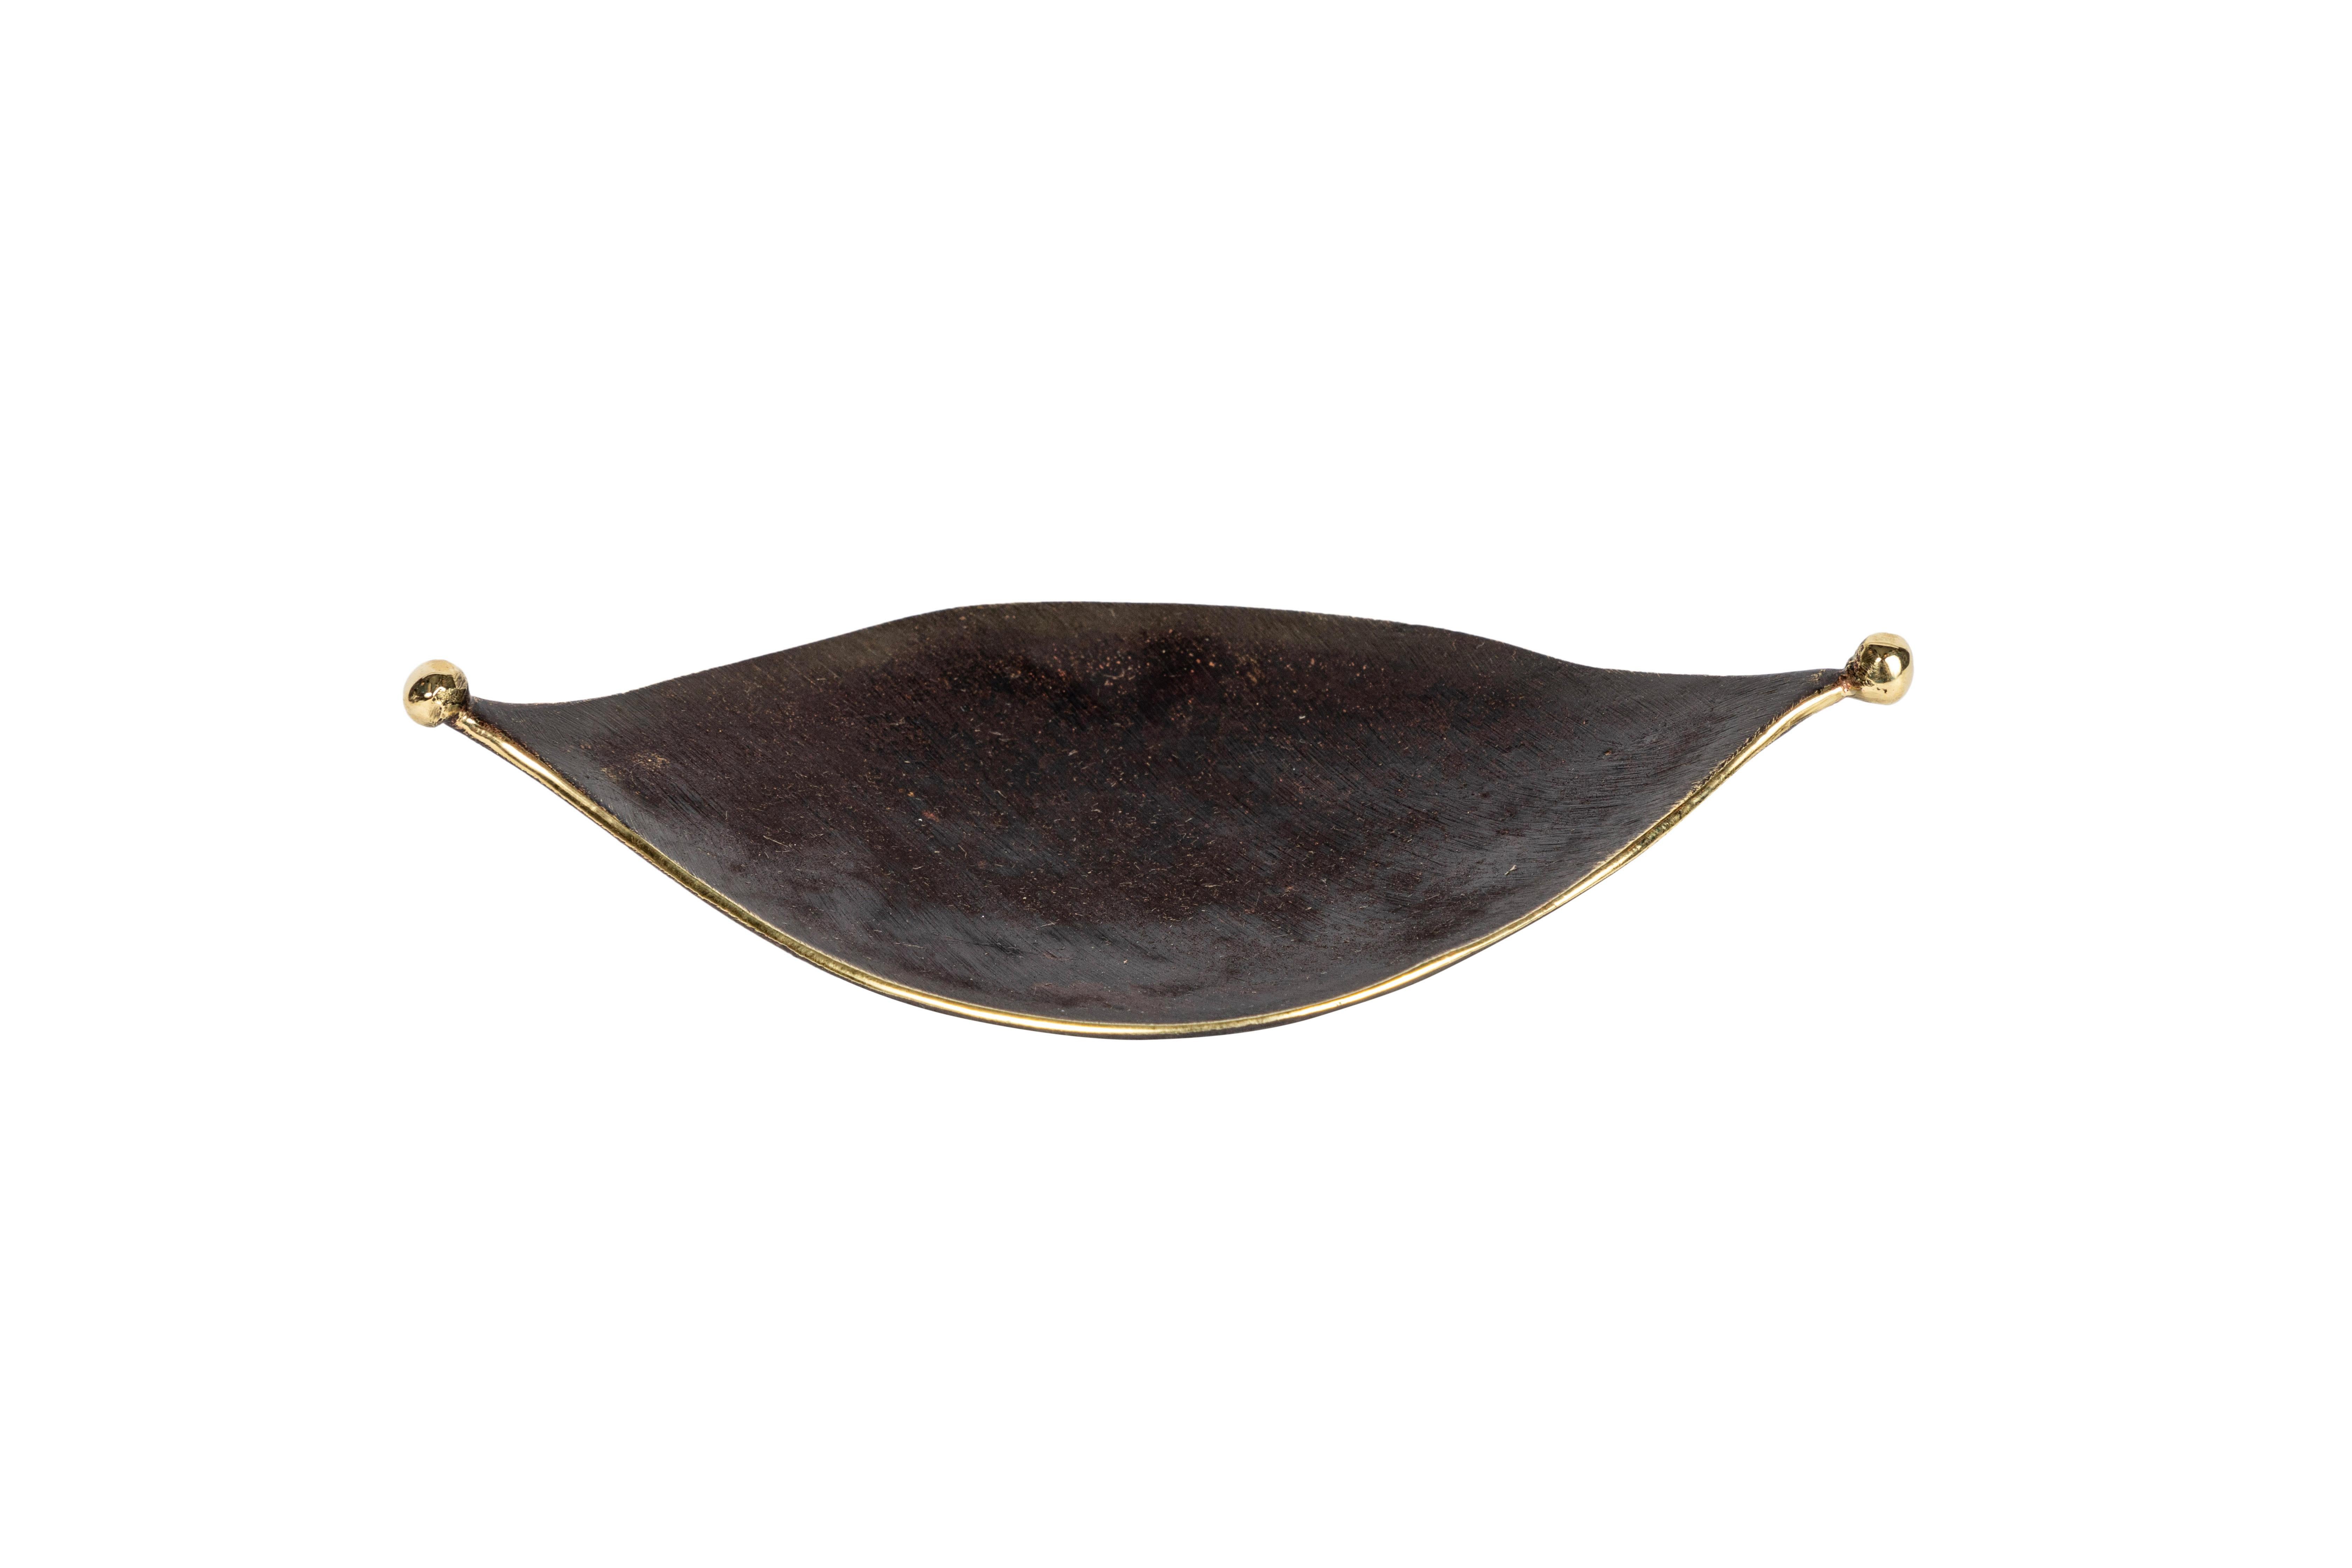 Carl Auböck model #3431 'Knopferl' brass tray. Designed in the 1950s, this incredibly refined and sculptural Viennese tray is executed in patinated and polished brass. This petite decorative tray can be used for a variety of purposes.

Price is per